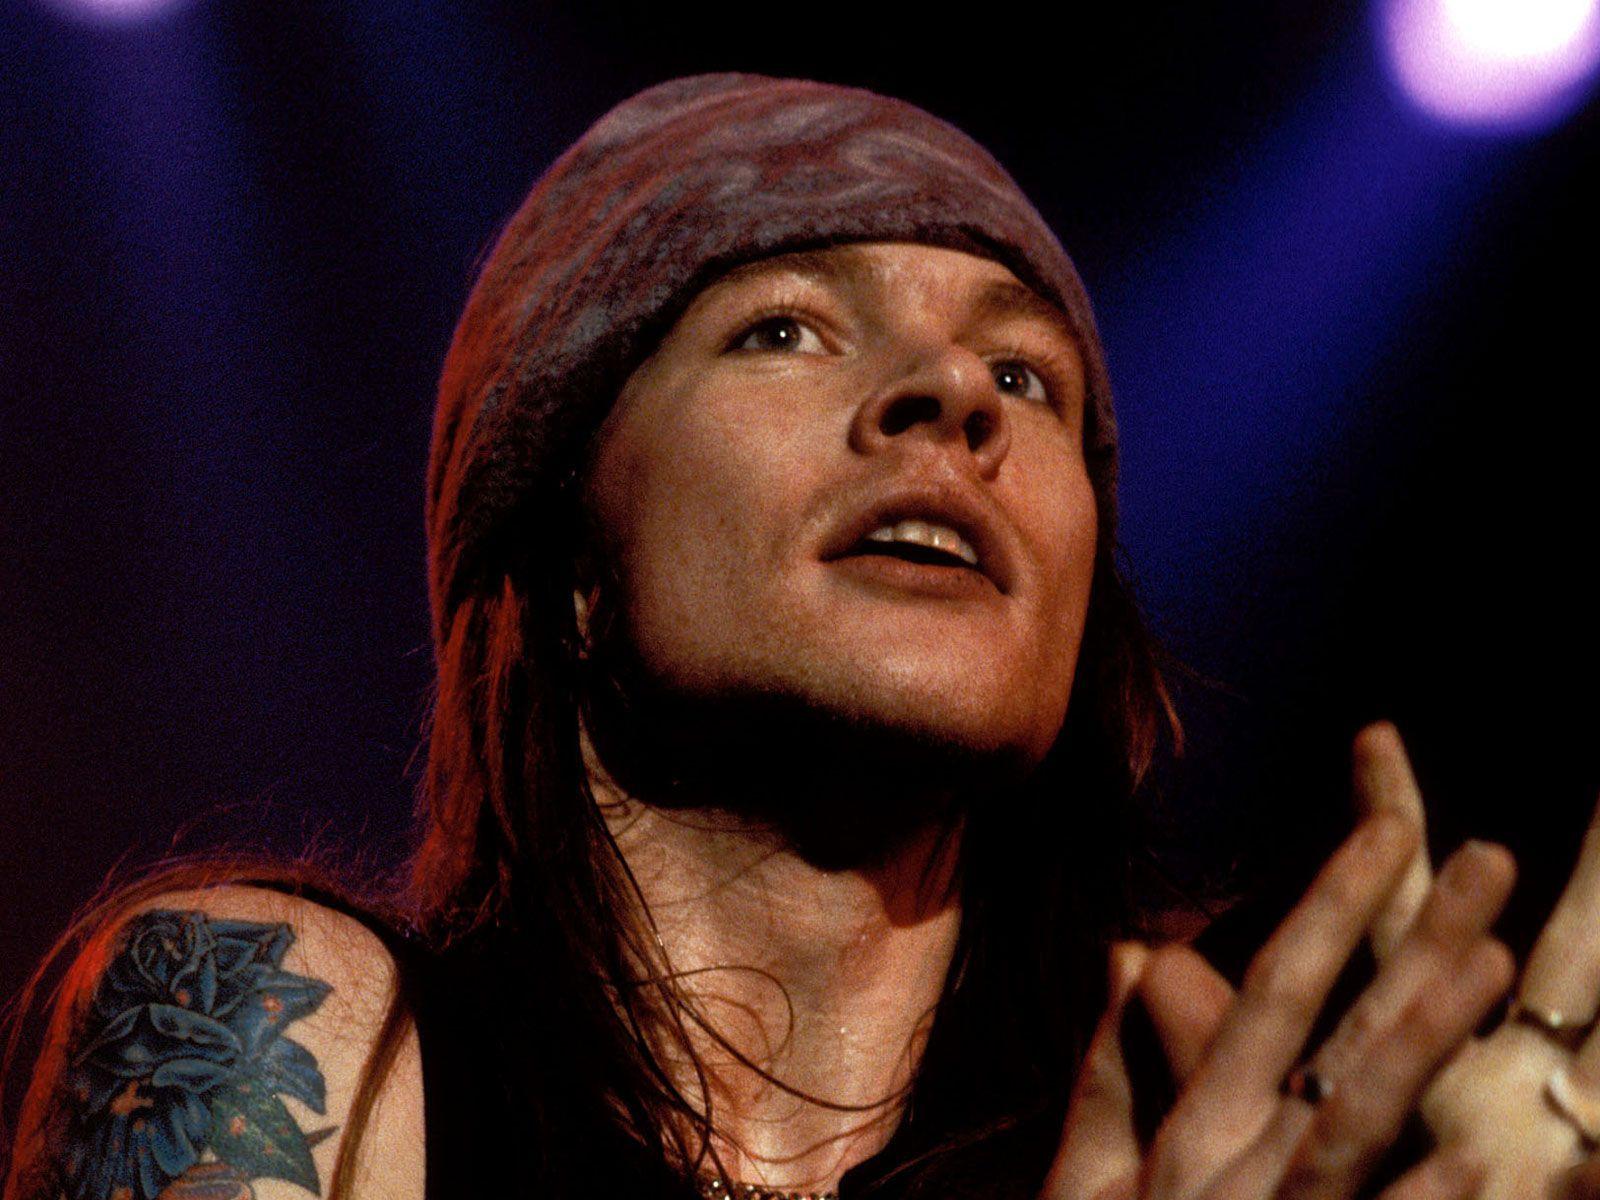 Axl Rose Picture Wallpaper HD. Download Background Wallpaper Free